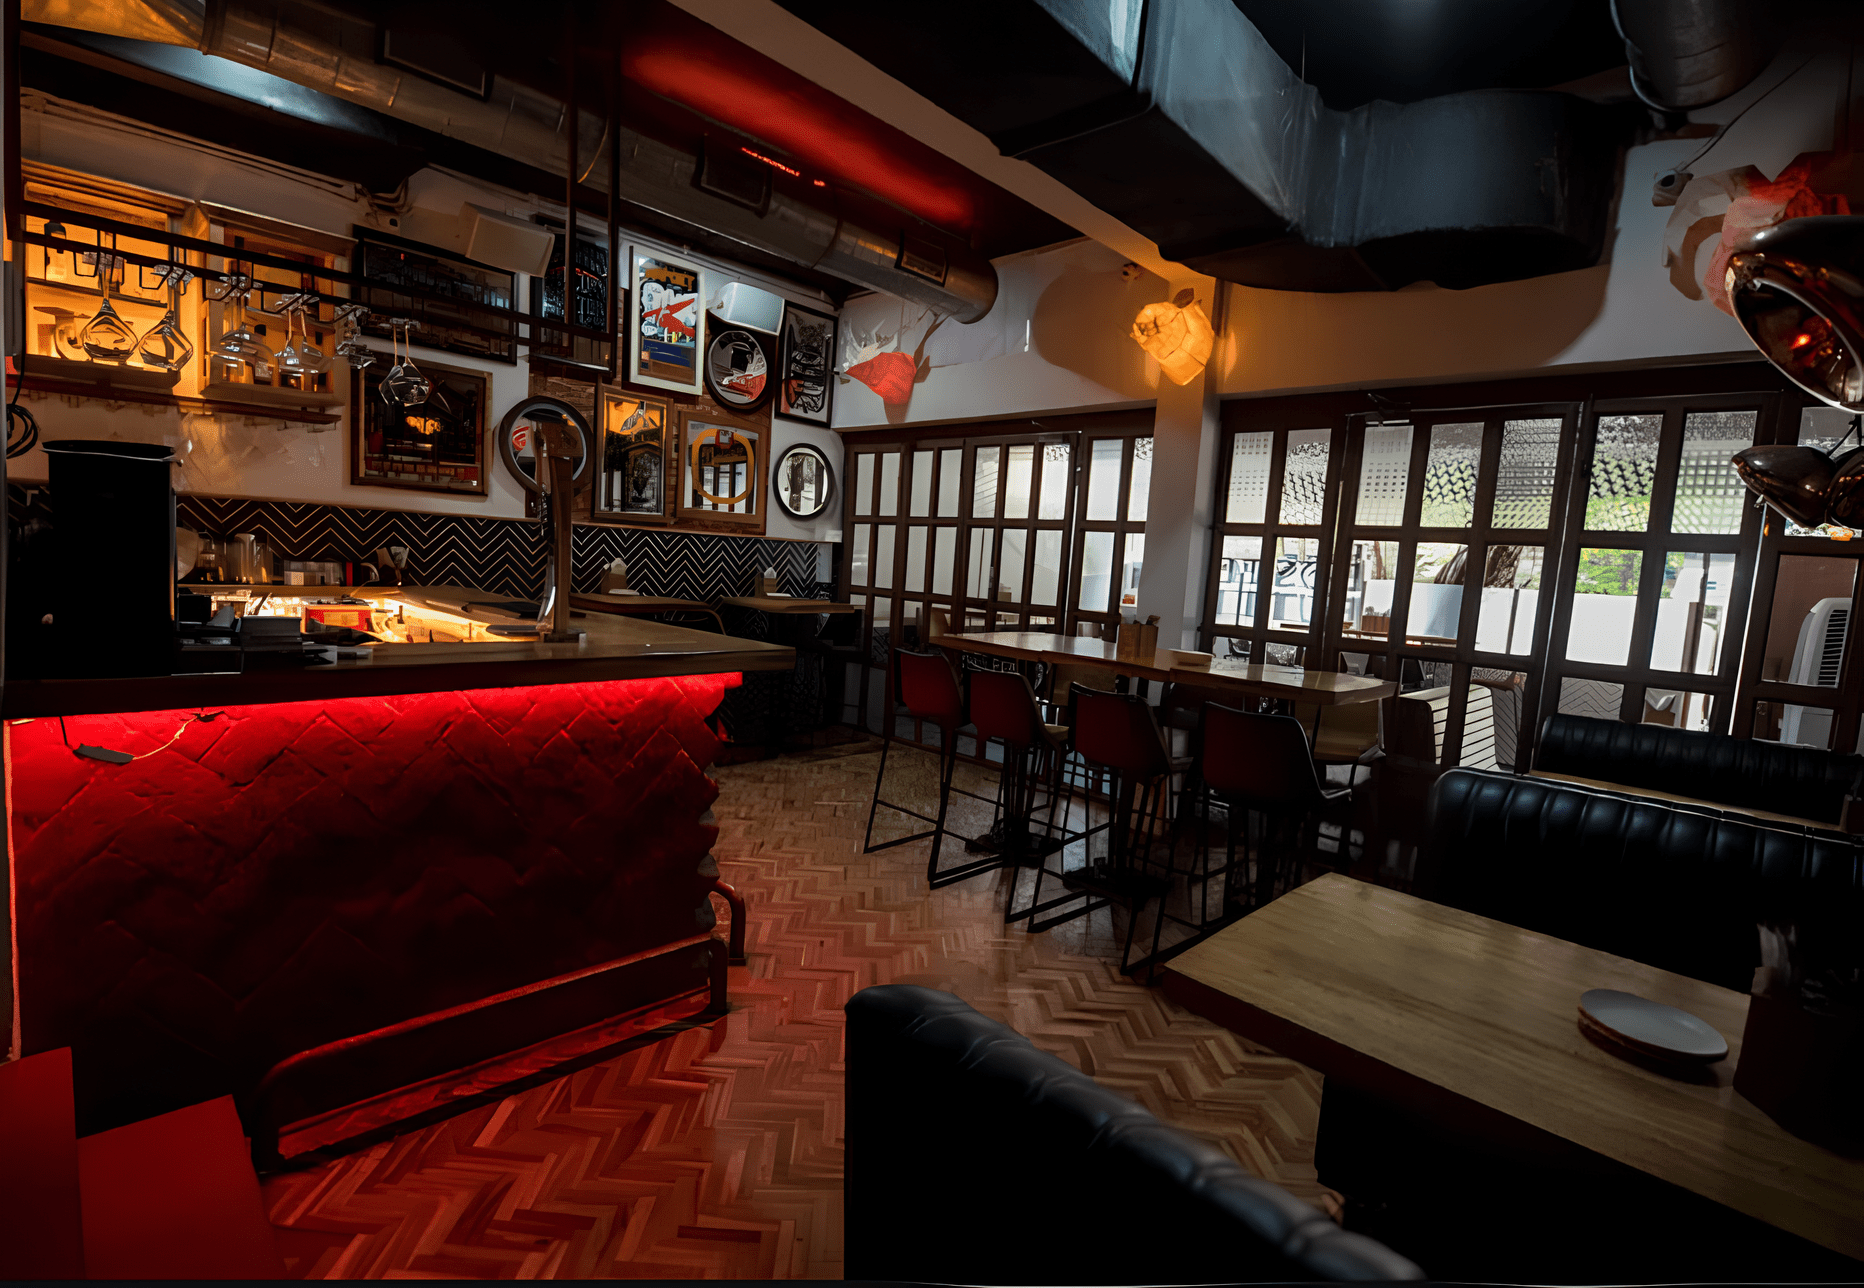 A comfy, empty bar with red highlights and wood flooring.